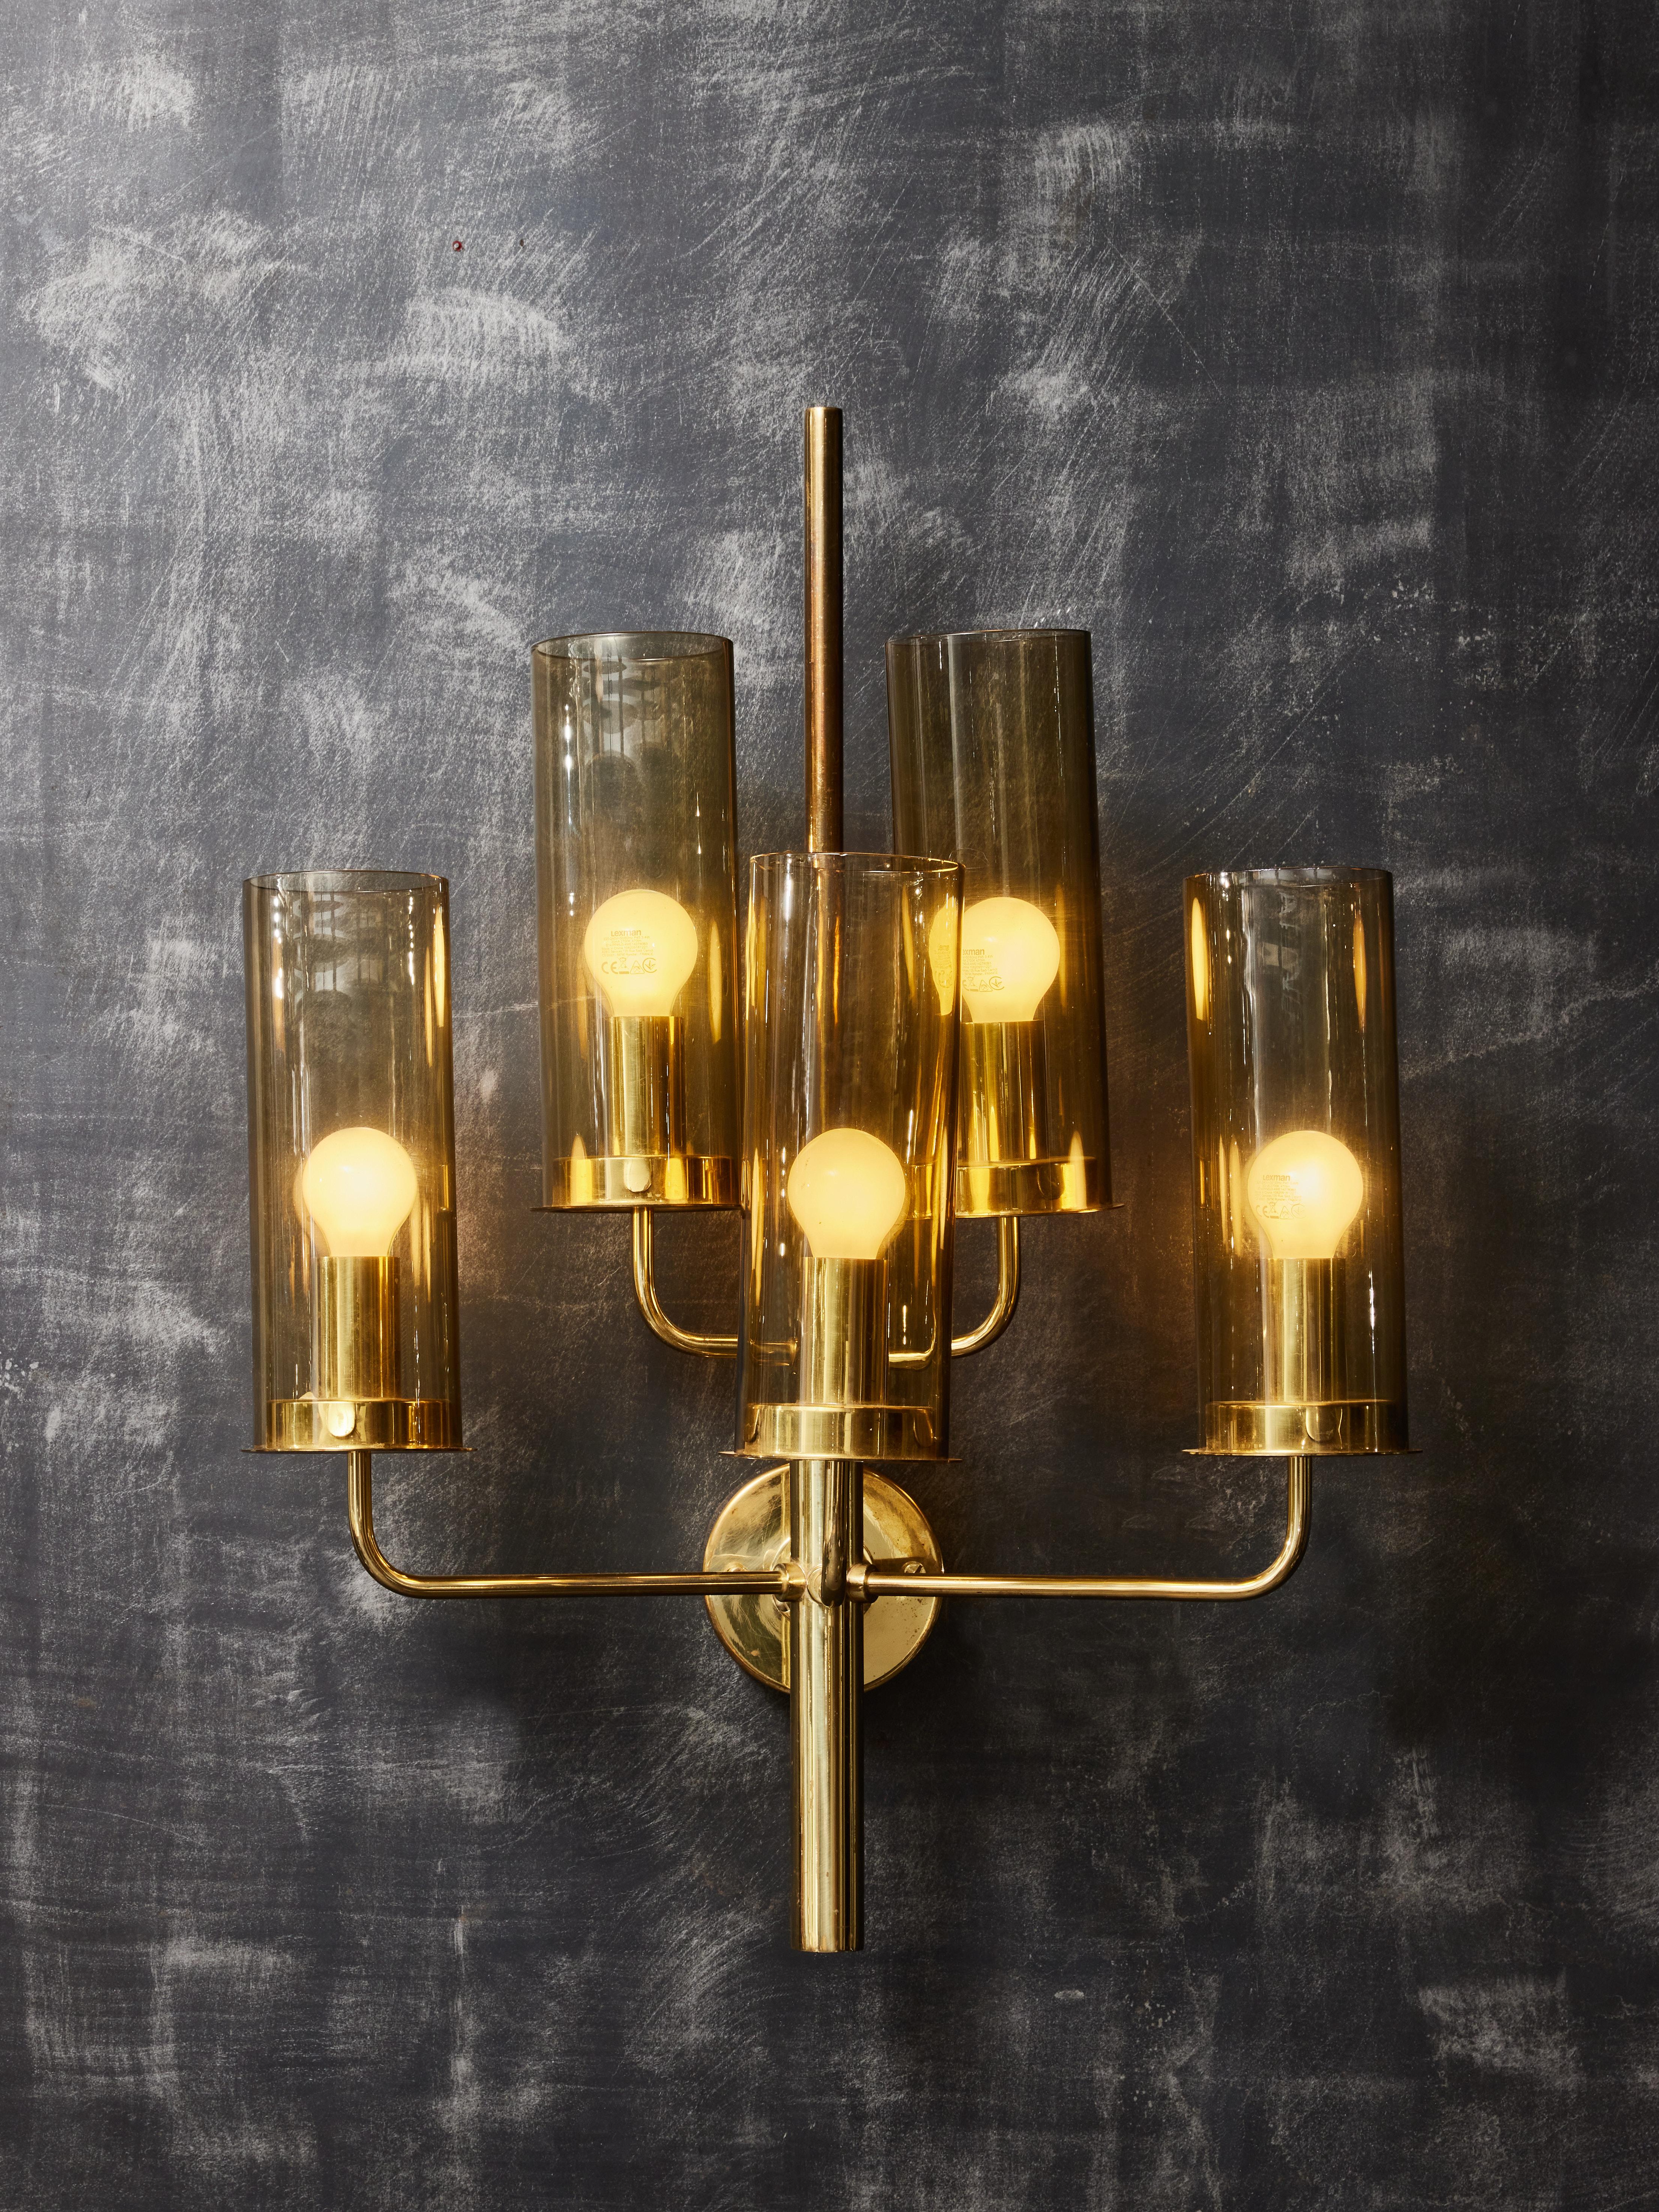 Pair of brass wall sconces by the Swedish designer Hans Agne Jakobsson, made of five arms of light with smoked glass diffuser. Original manufacturer sticker on the back.

Hans-Agne Jakobsson (1919-2009)
Born in the island of Gotland, Sweden,